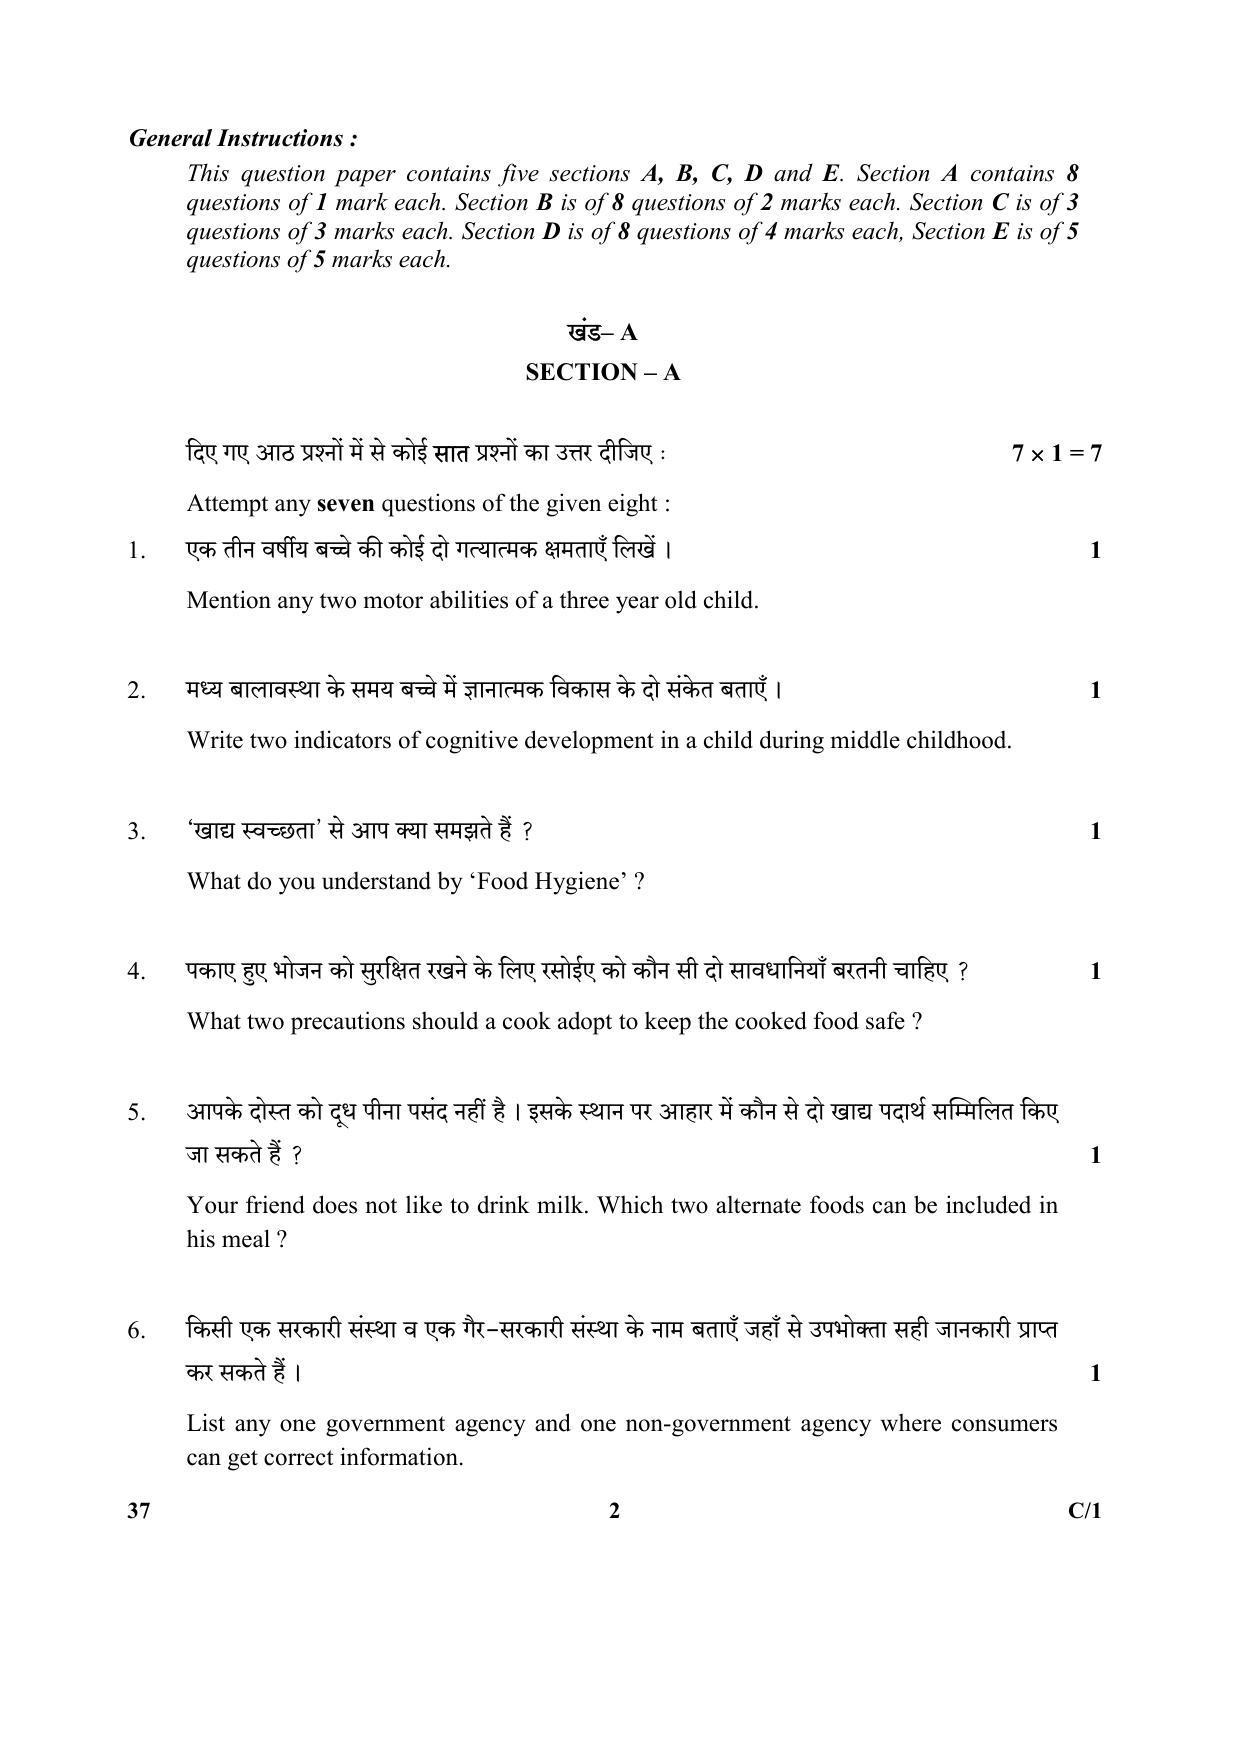 CBSE Class 10 37 (Home Science) 2018 Compartment Question Paper - Page 2